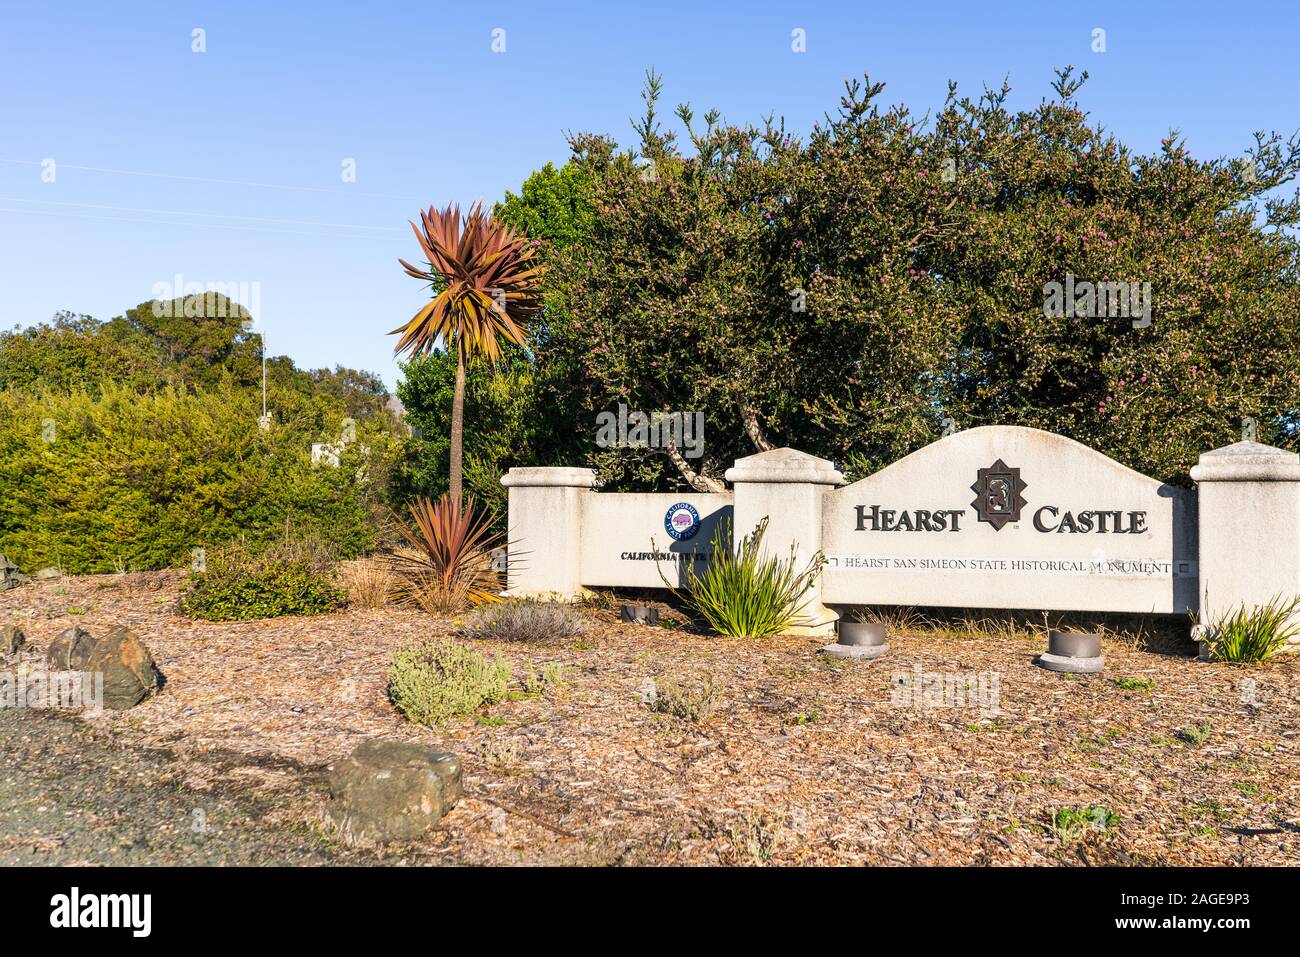 Dec 9, 2019 San Simeon / CA / USA - Entrance to Hearst Castle, a Hearst San Simeon Historical State Monument, administered by California State Parks o Stock Photo